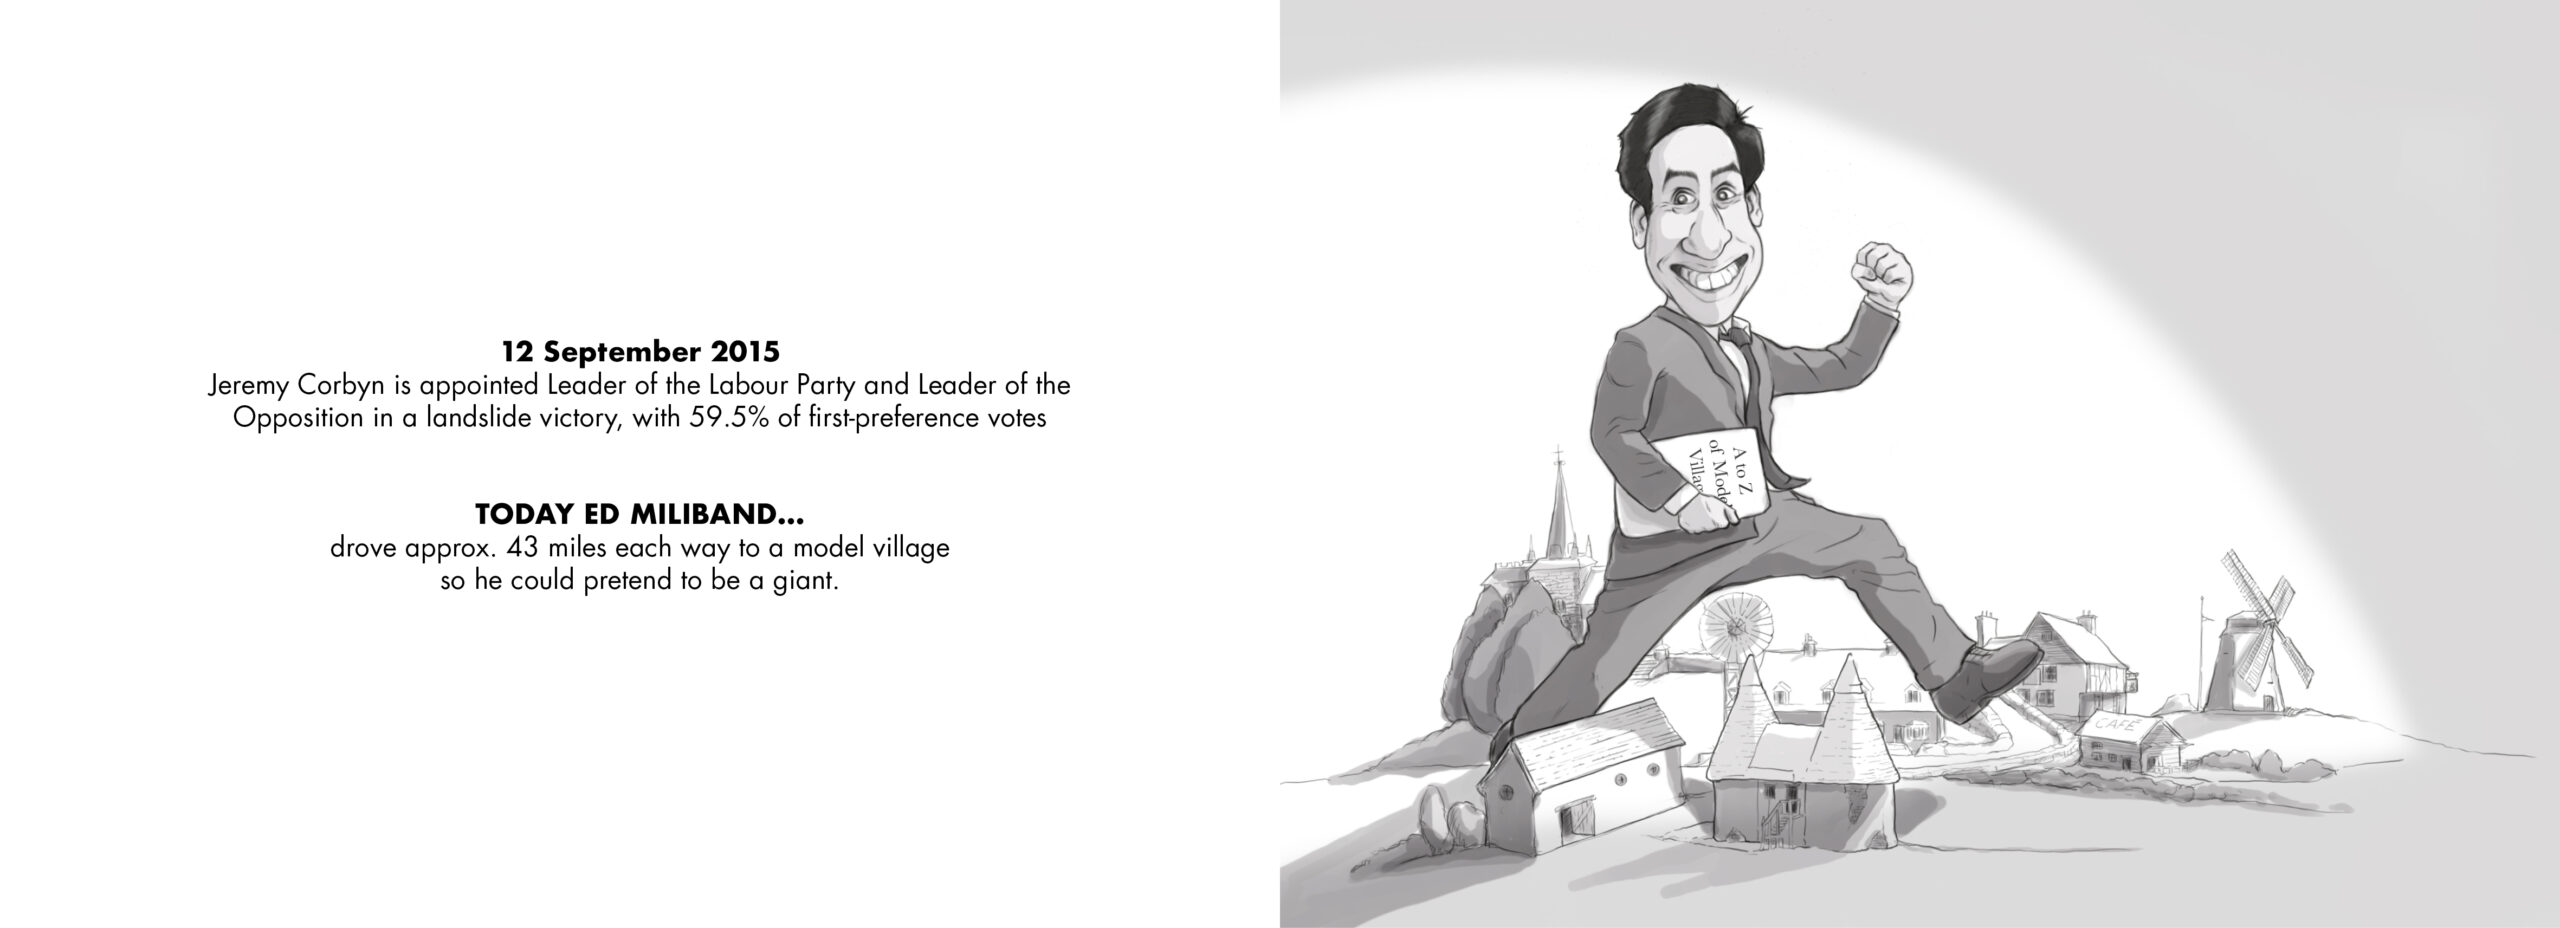 Chas with Ed Miliband Illustration - number 02